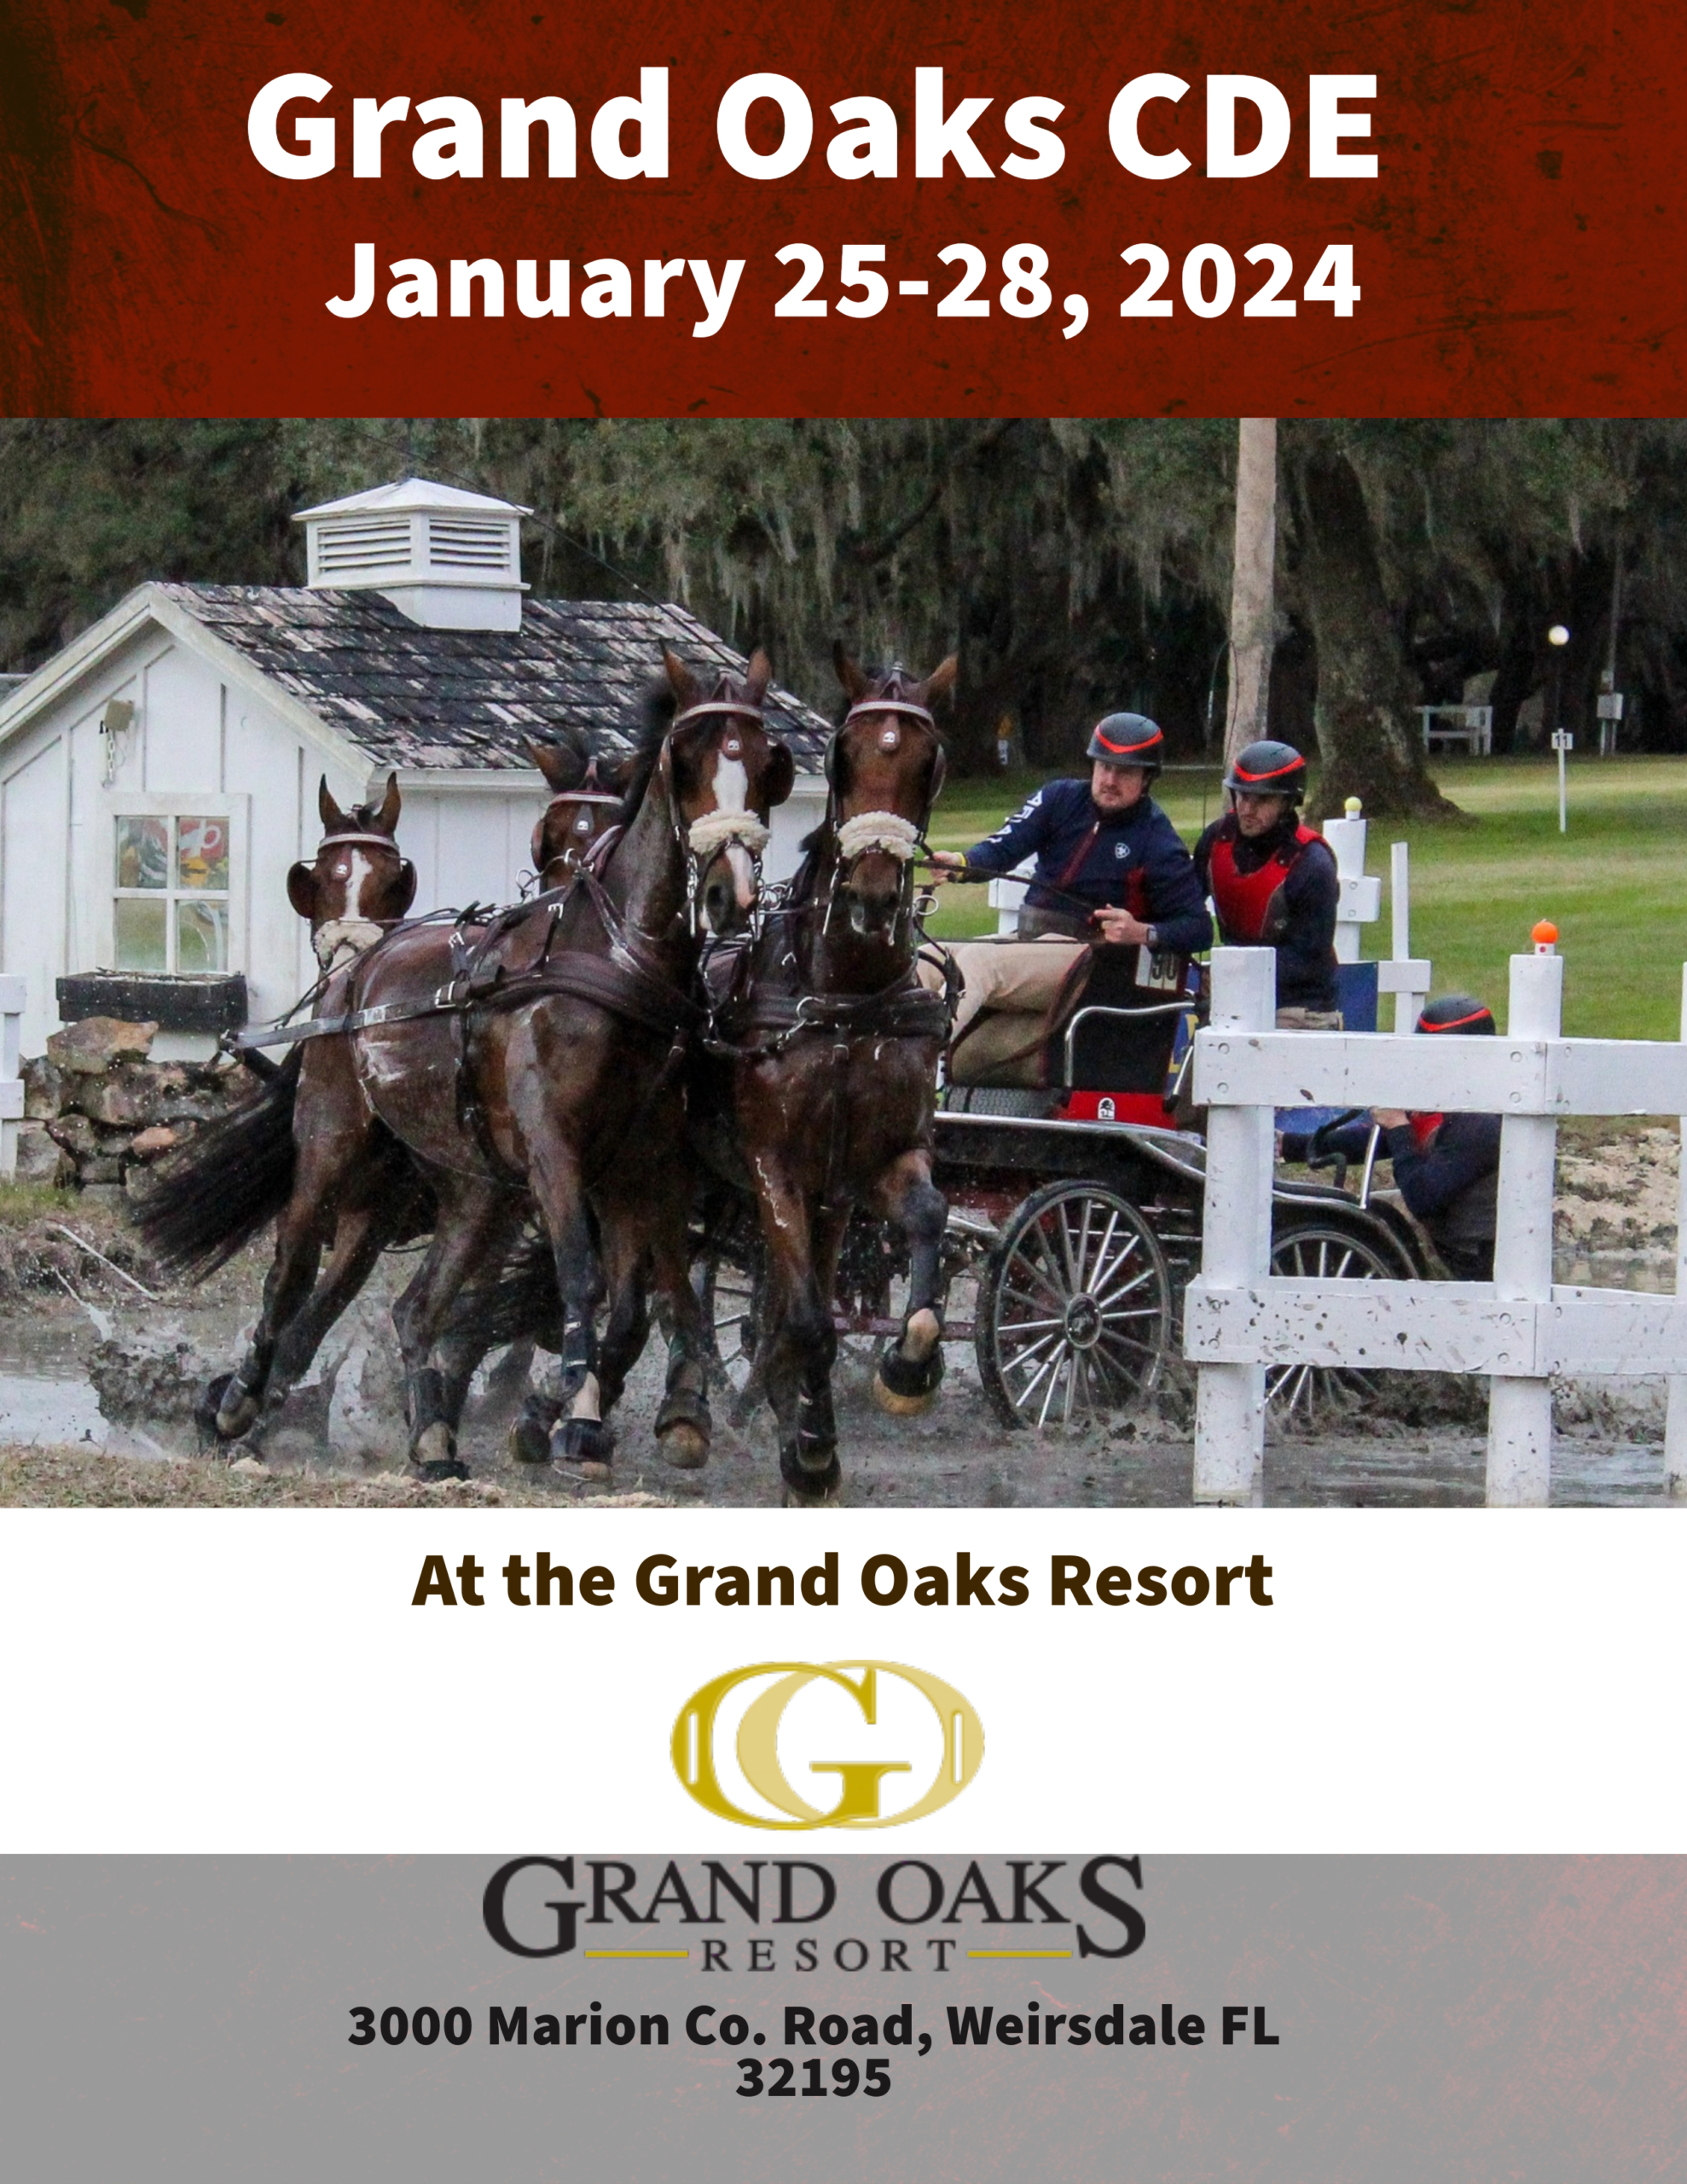 Grand Oaks CDE carriage driving competition